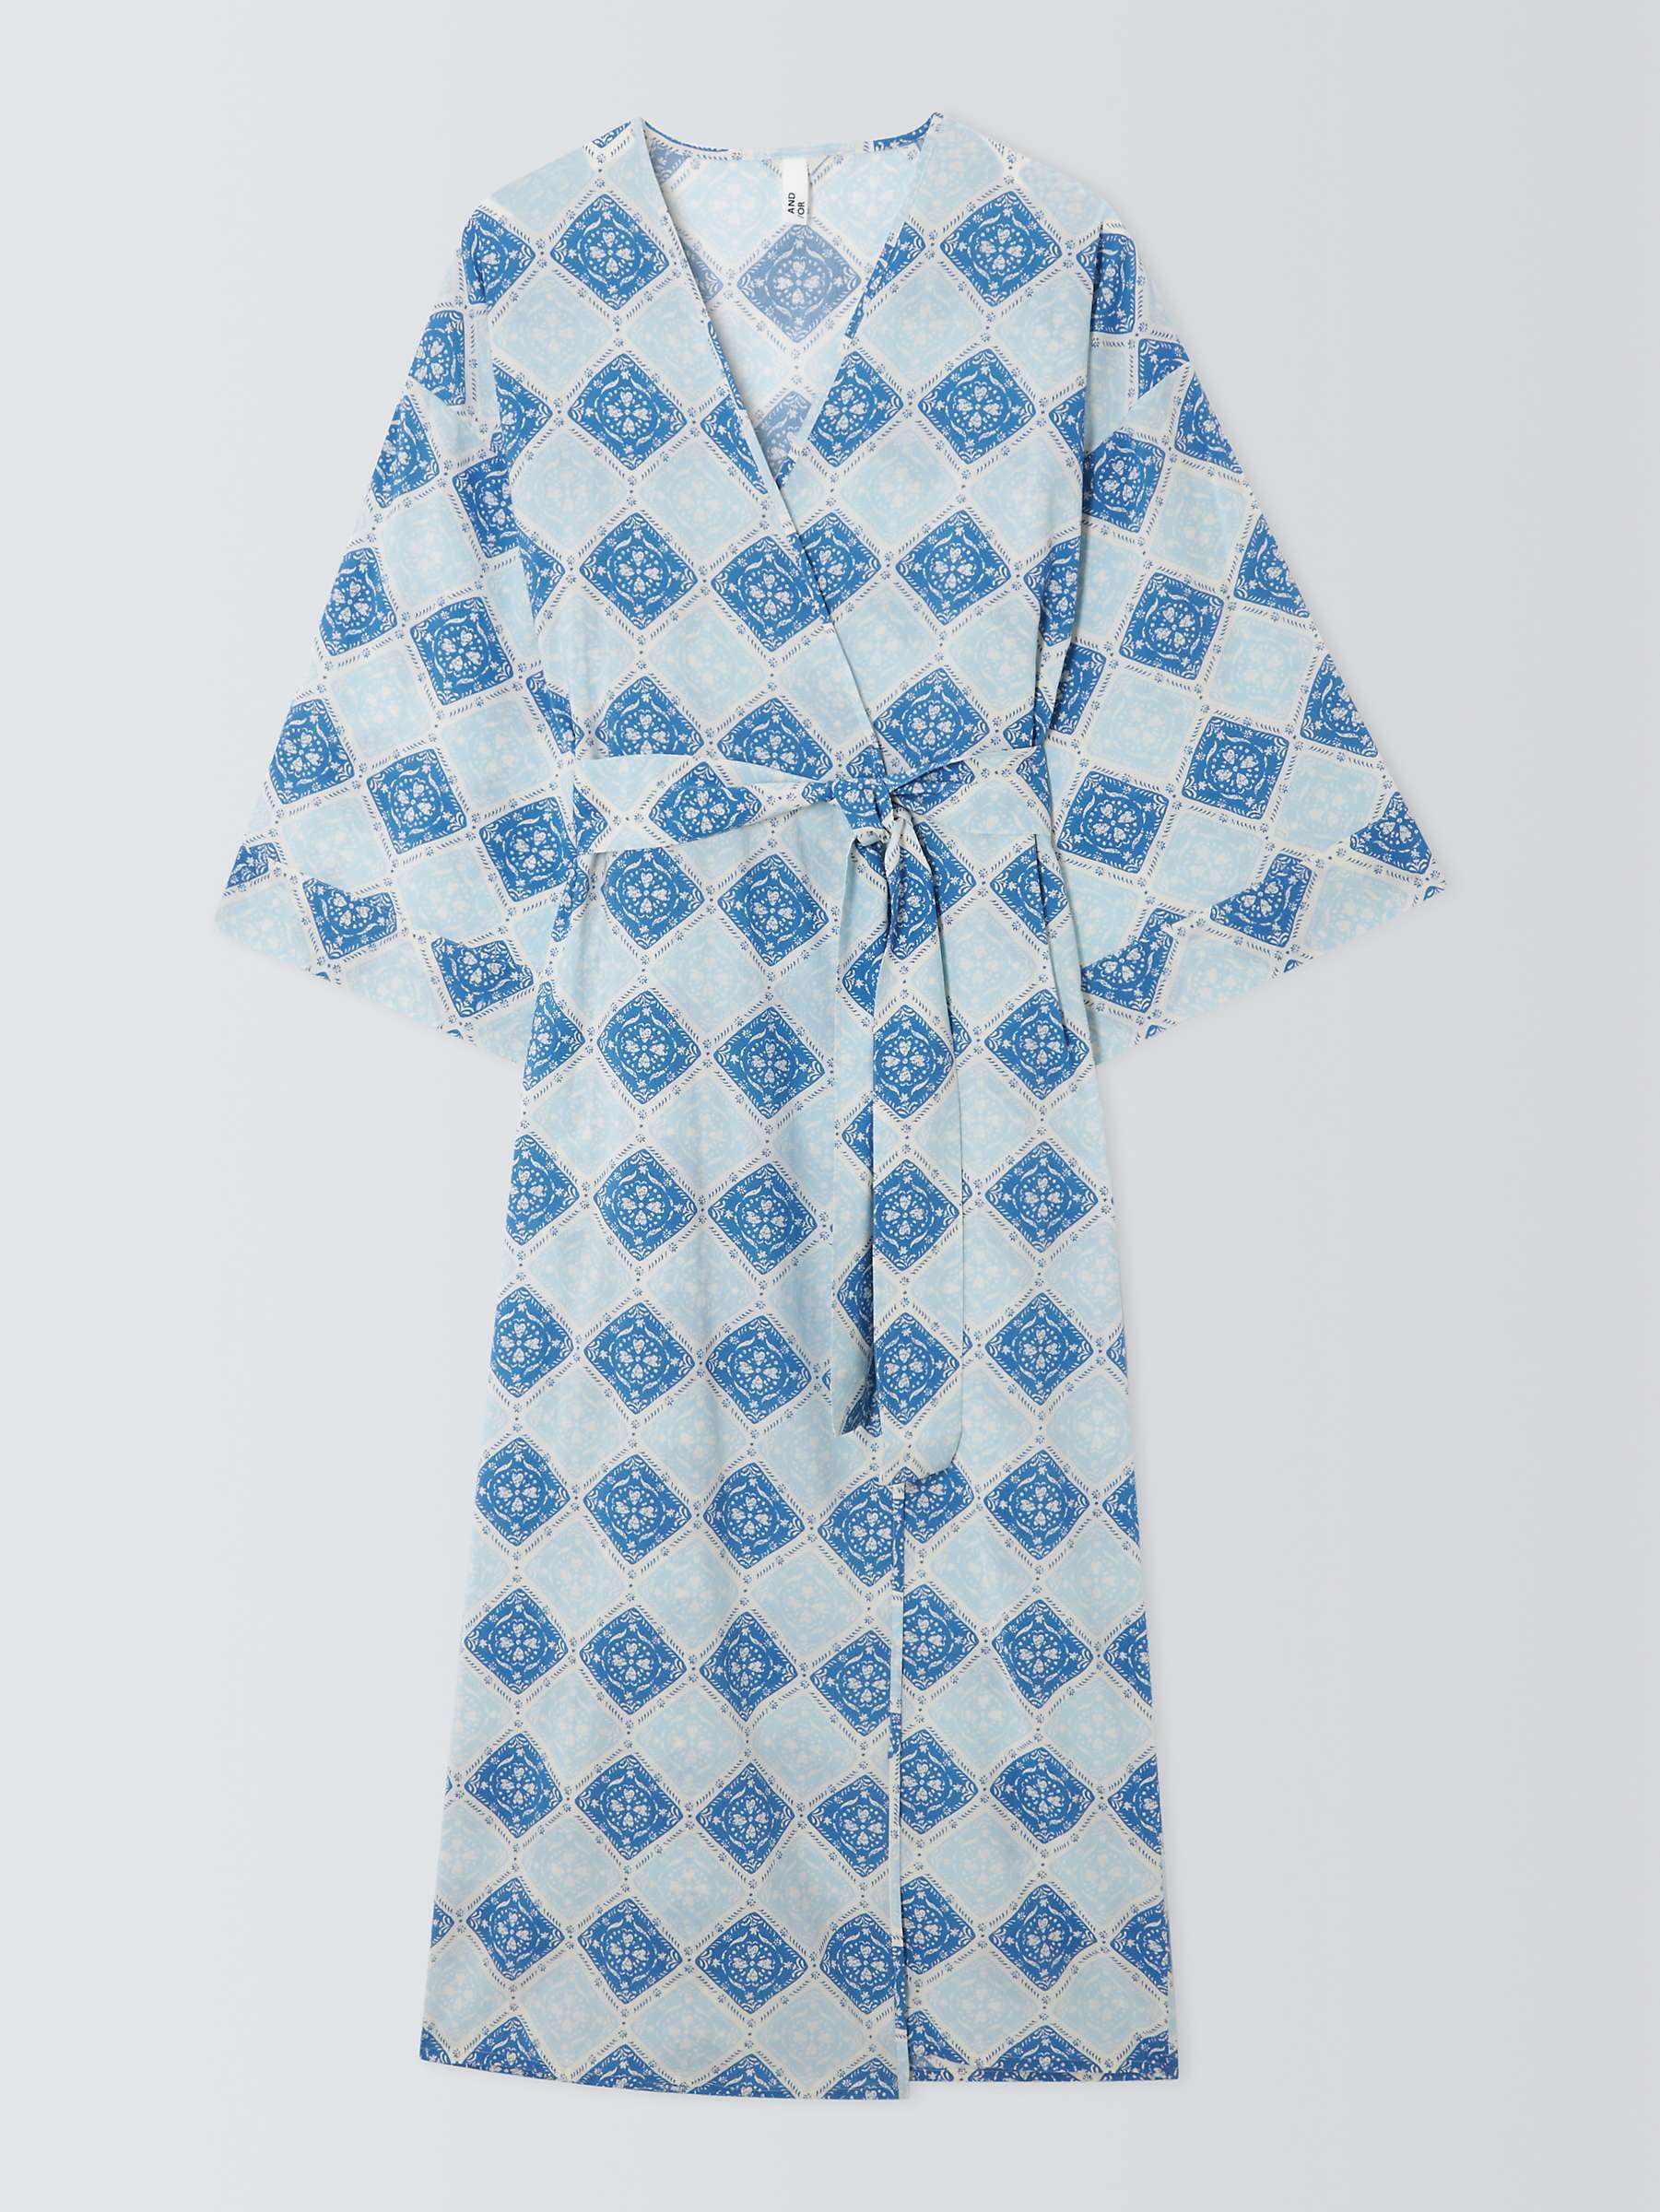 Buy AND/OR Mosiac Tile Dressing Gown, Blue Online at johnlewis.com